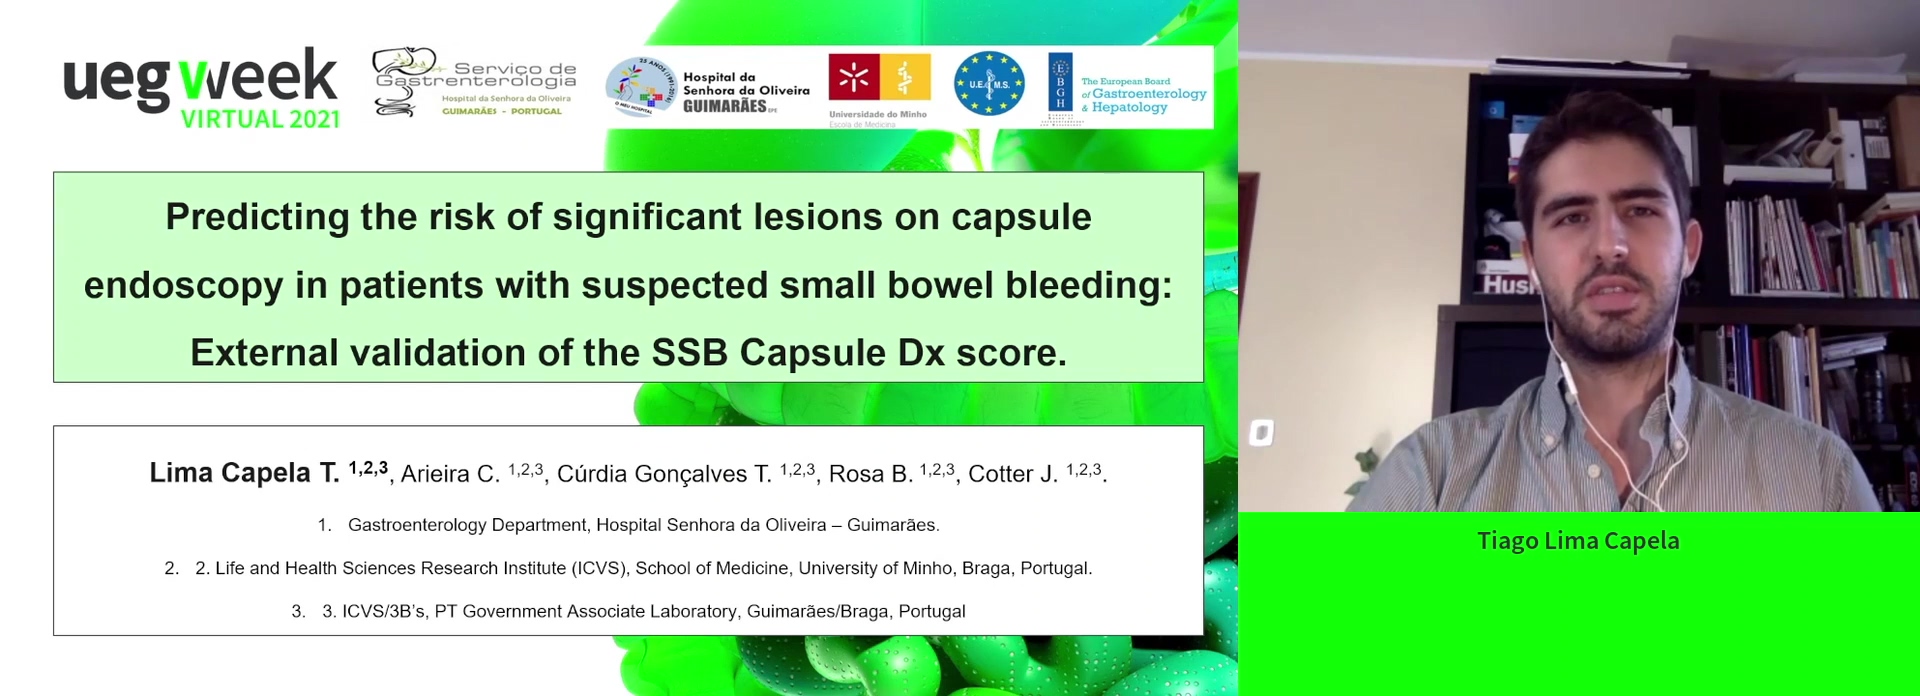 PREDICTING THE RISK OF SIGNIFICANT LESIONS ON CAPSULE ENDOSCOPY IN PATIENTS WITH SUSPECTED SMALL BOWEL BLEEDING – EXTERNAL VALIDATION OF THE SSB CAPSULE DX SCORE